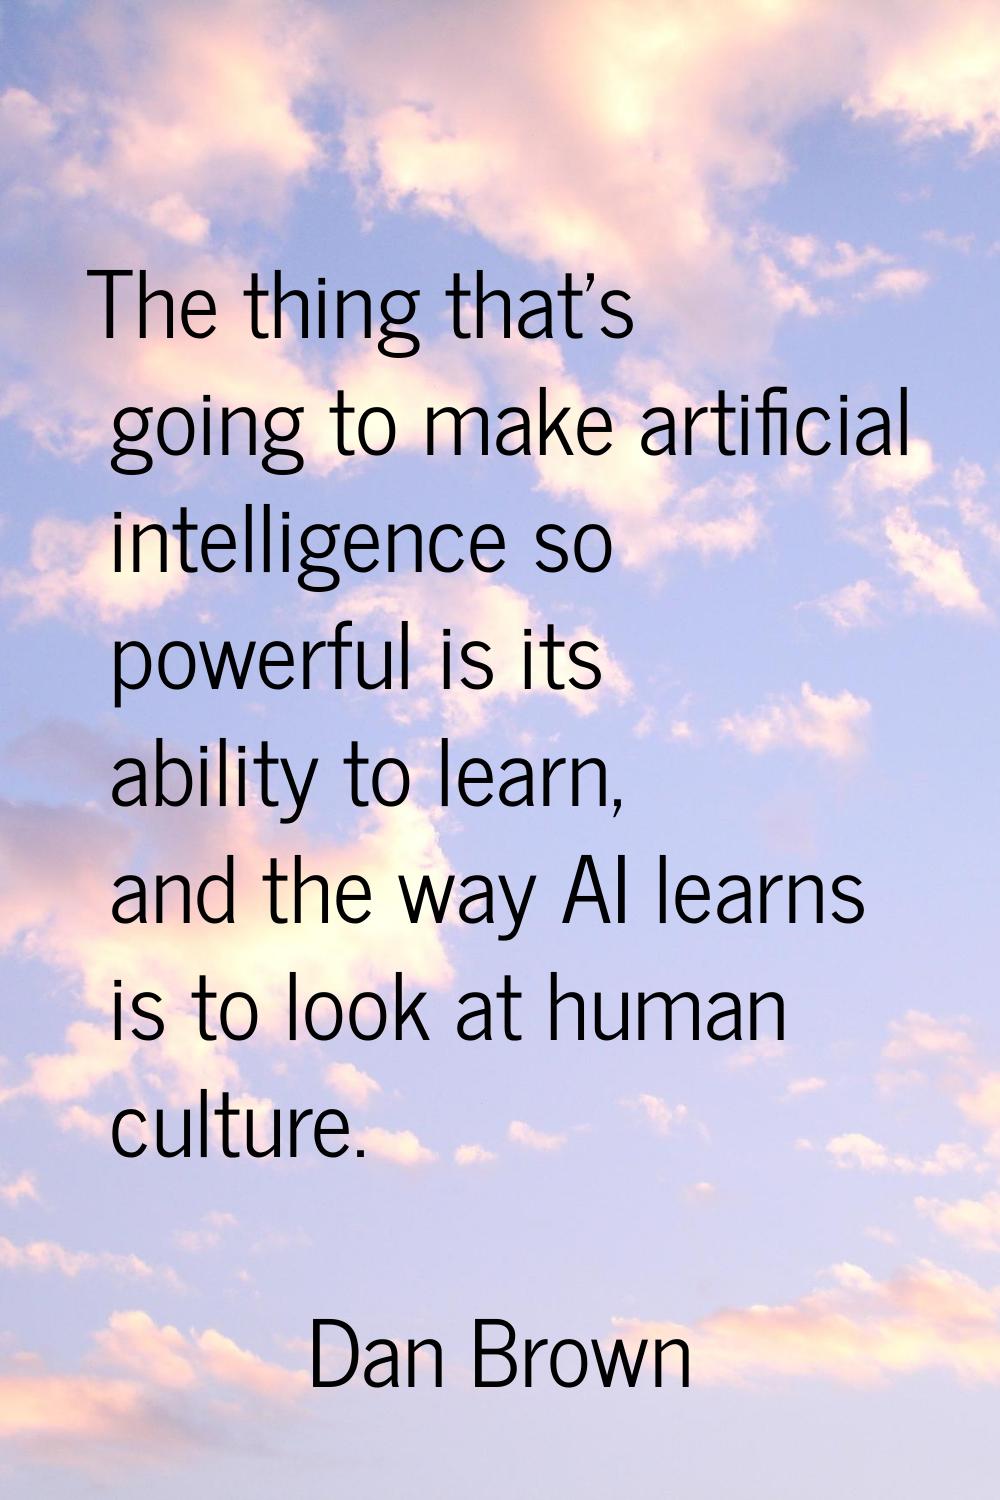 The thing that's going to make artificial intelligence so powerful is its ability to learn, and the